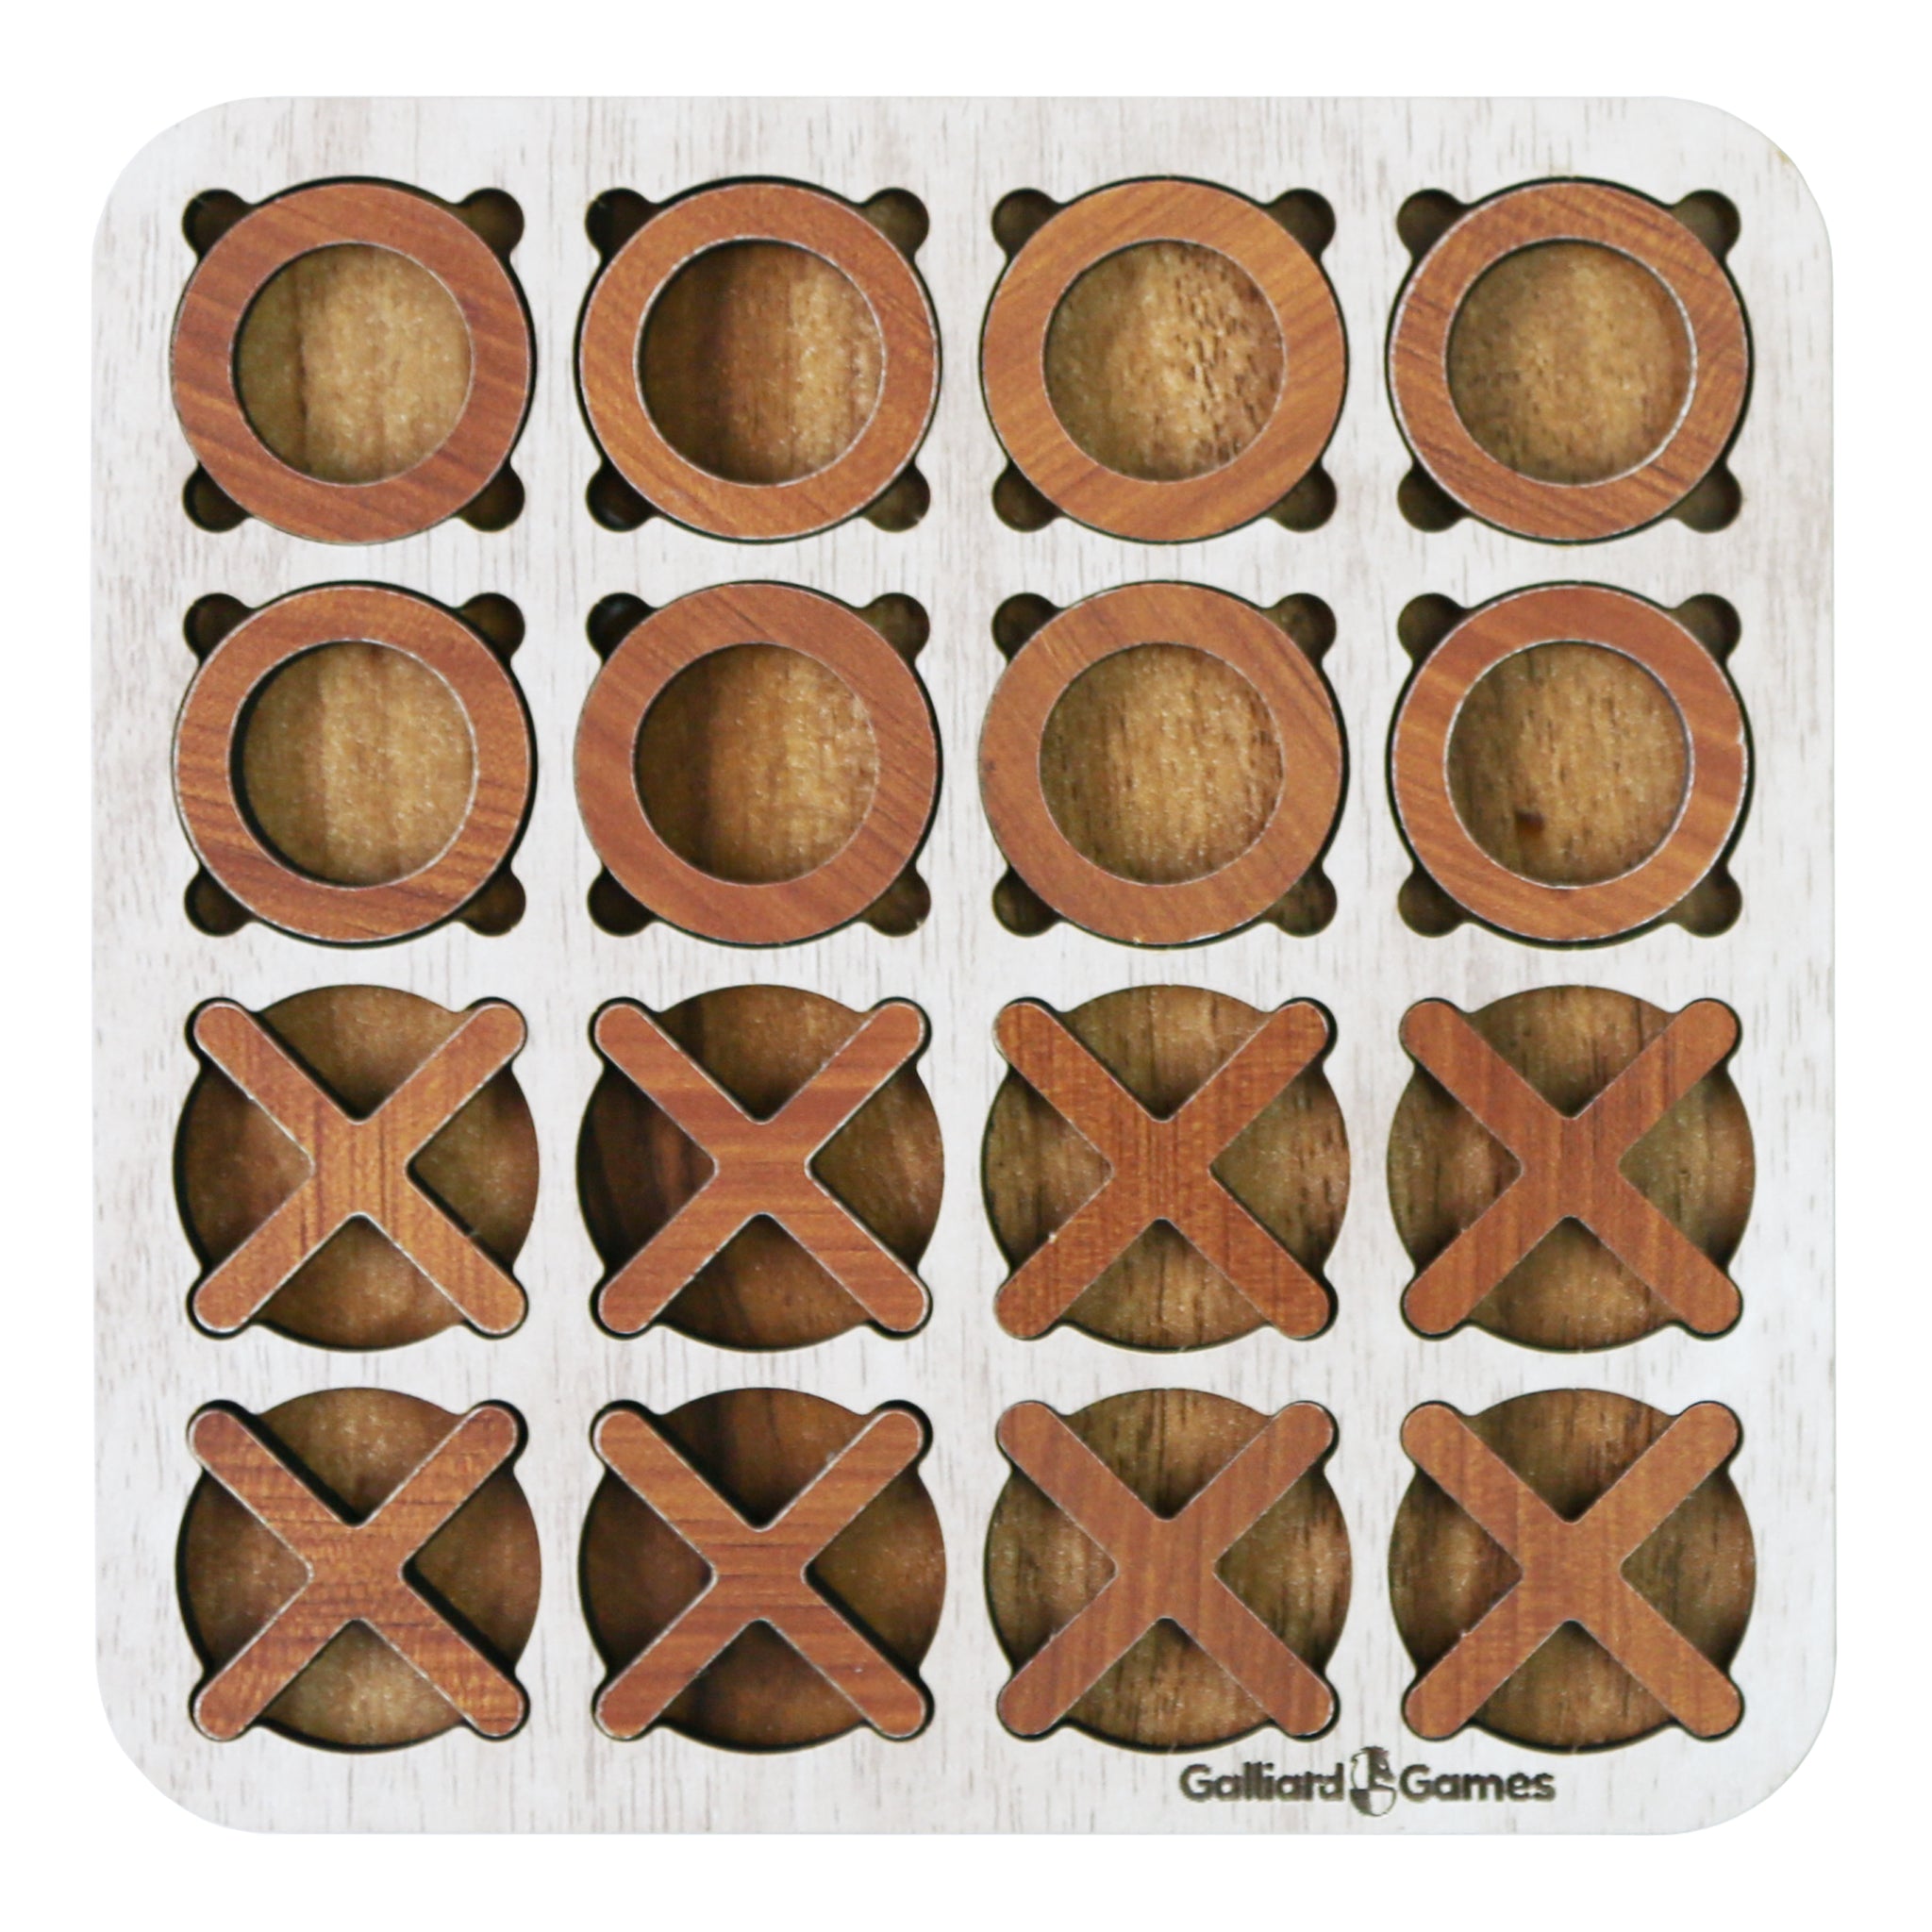 Galliard Games Tic Tac Toe, Noughts and Crosses Game (4x4 Board)